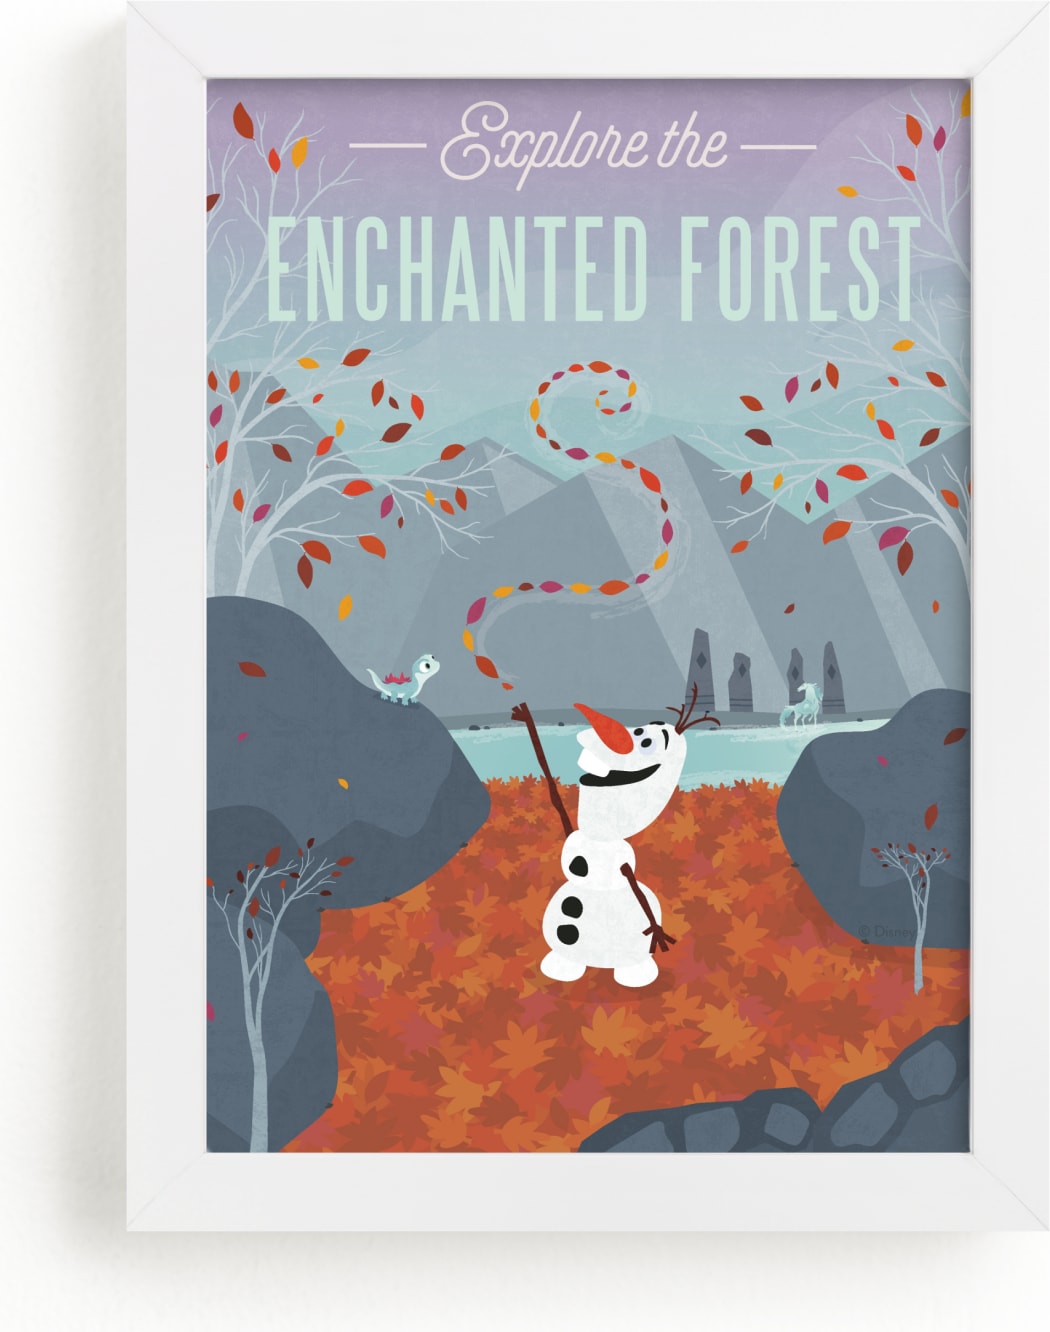 This is a blue disney art by Erica Krystek called Explore the Enchanted Forest from Disney's Frozen.